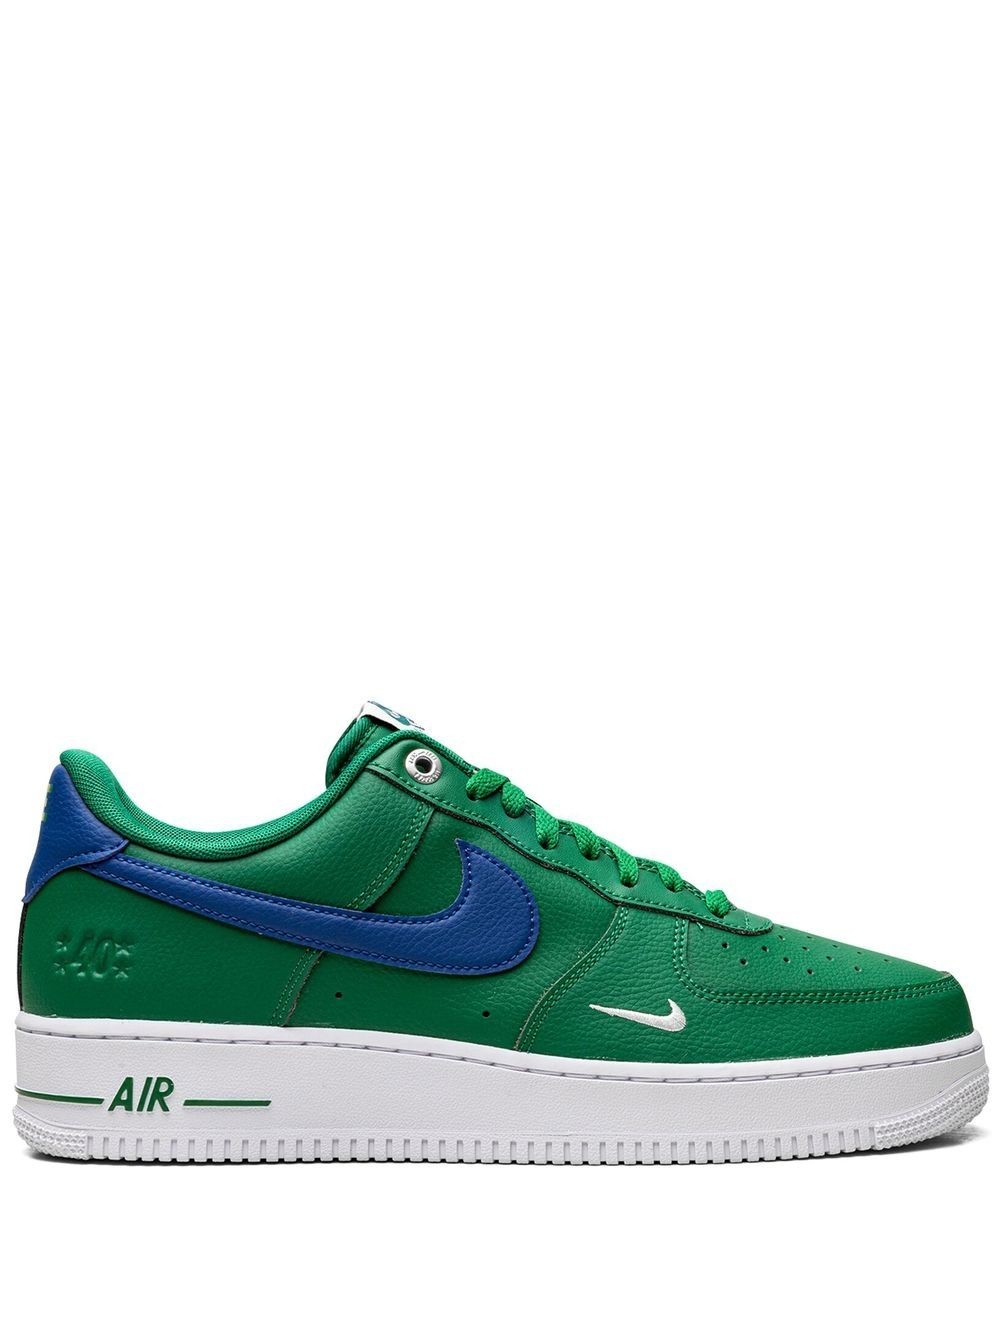 Air Force 1 Low "Malachite - Green" sneakers - 1